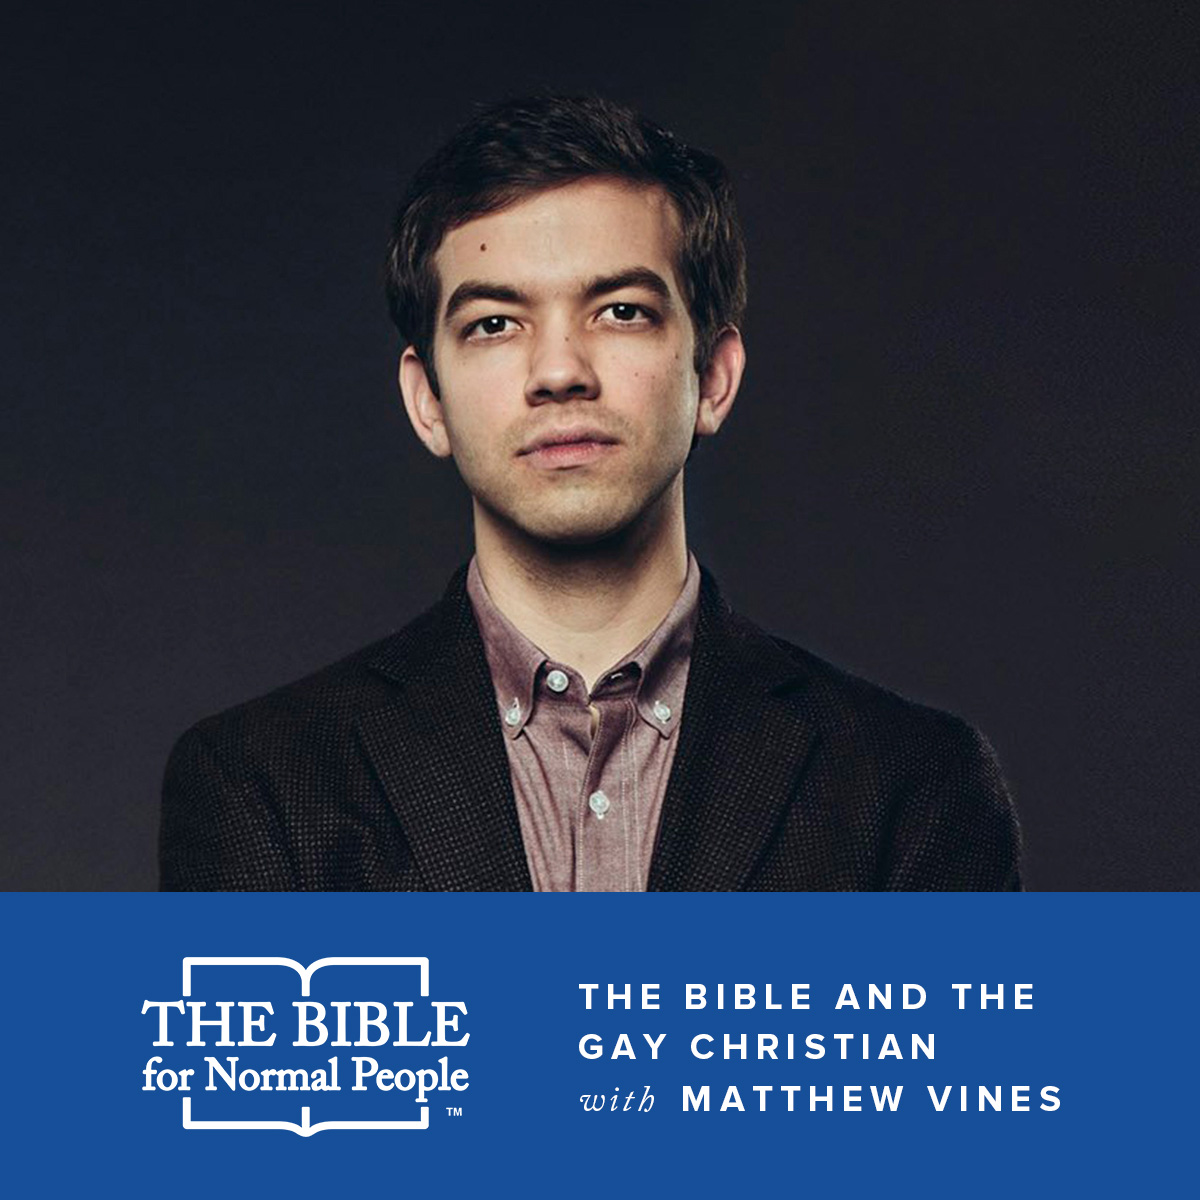 Interview with Matthew Vines: The Bible and the Gay Christian